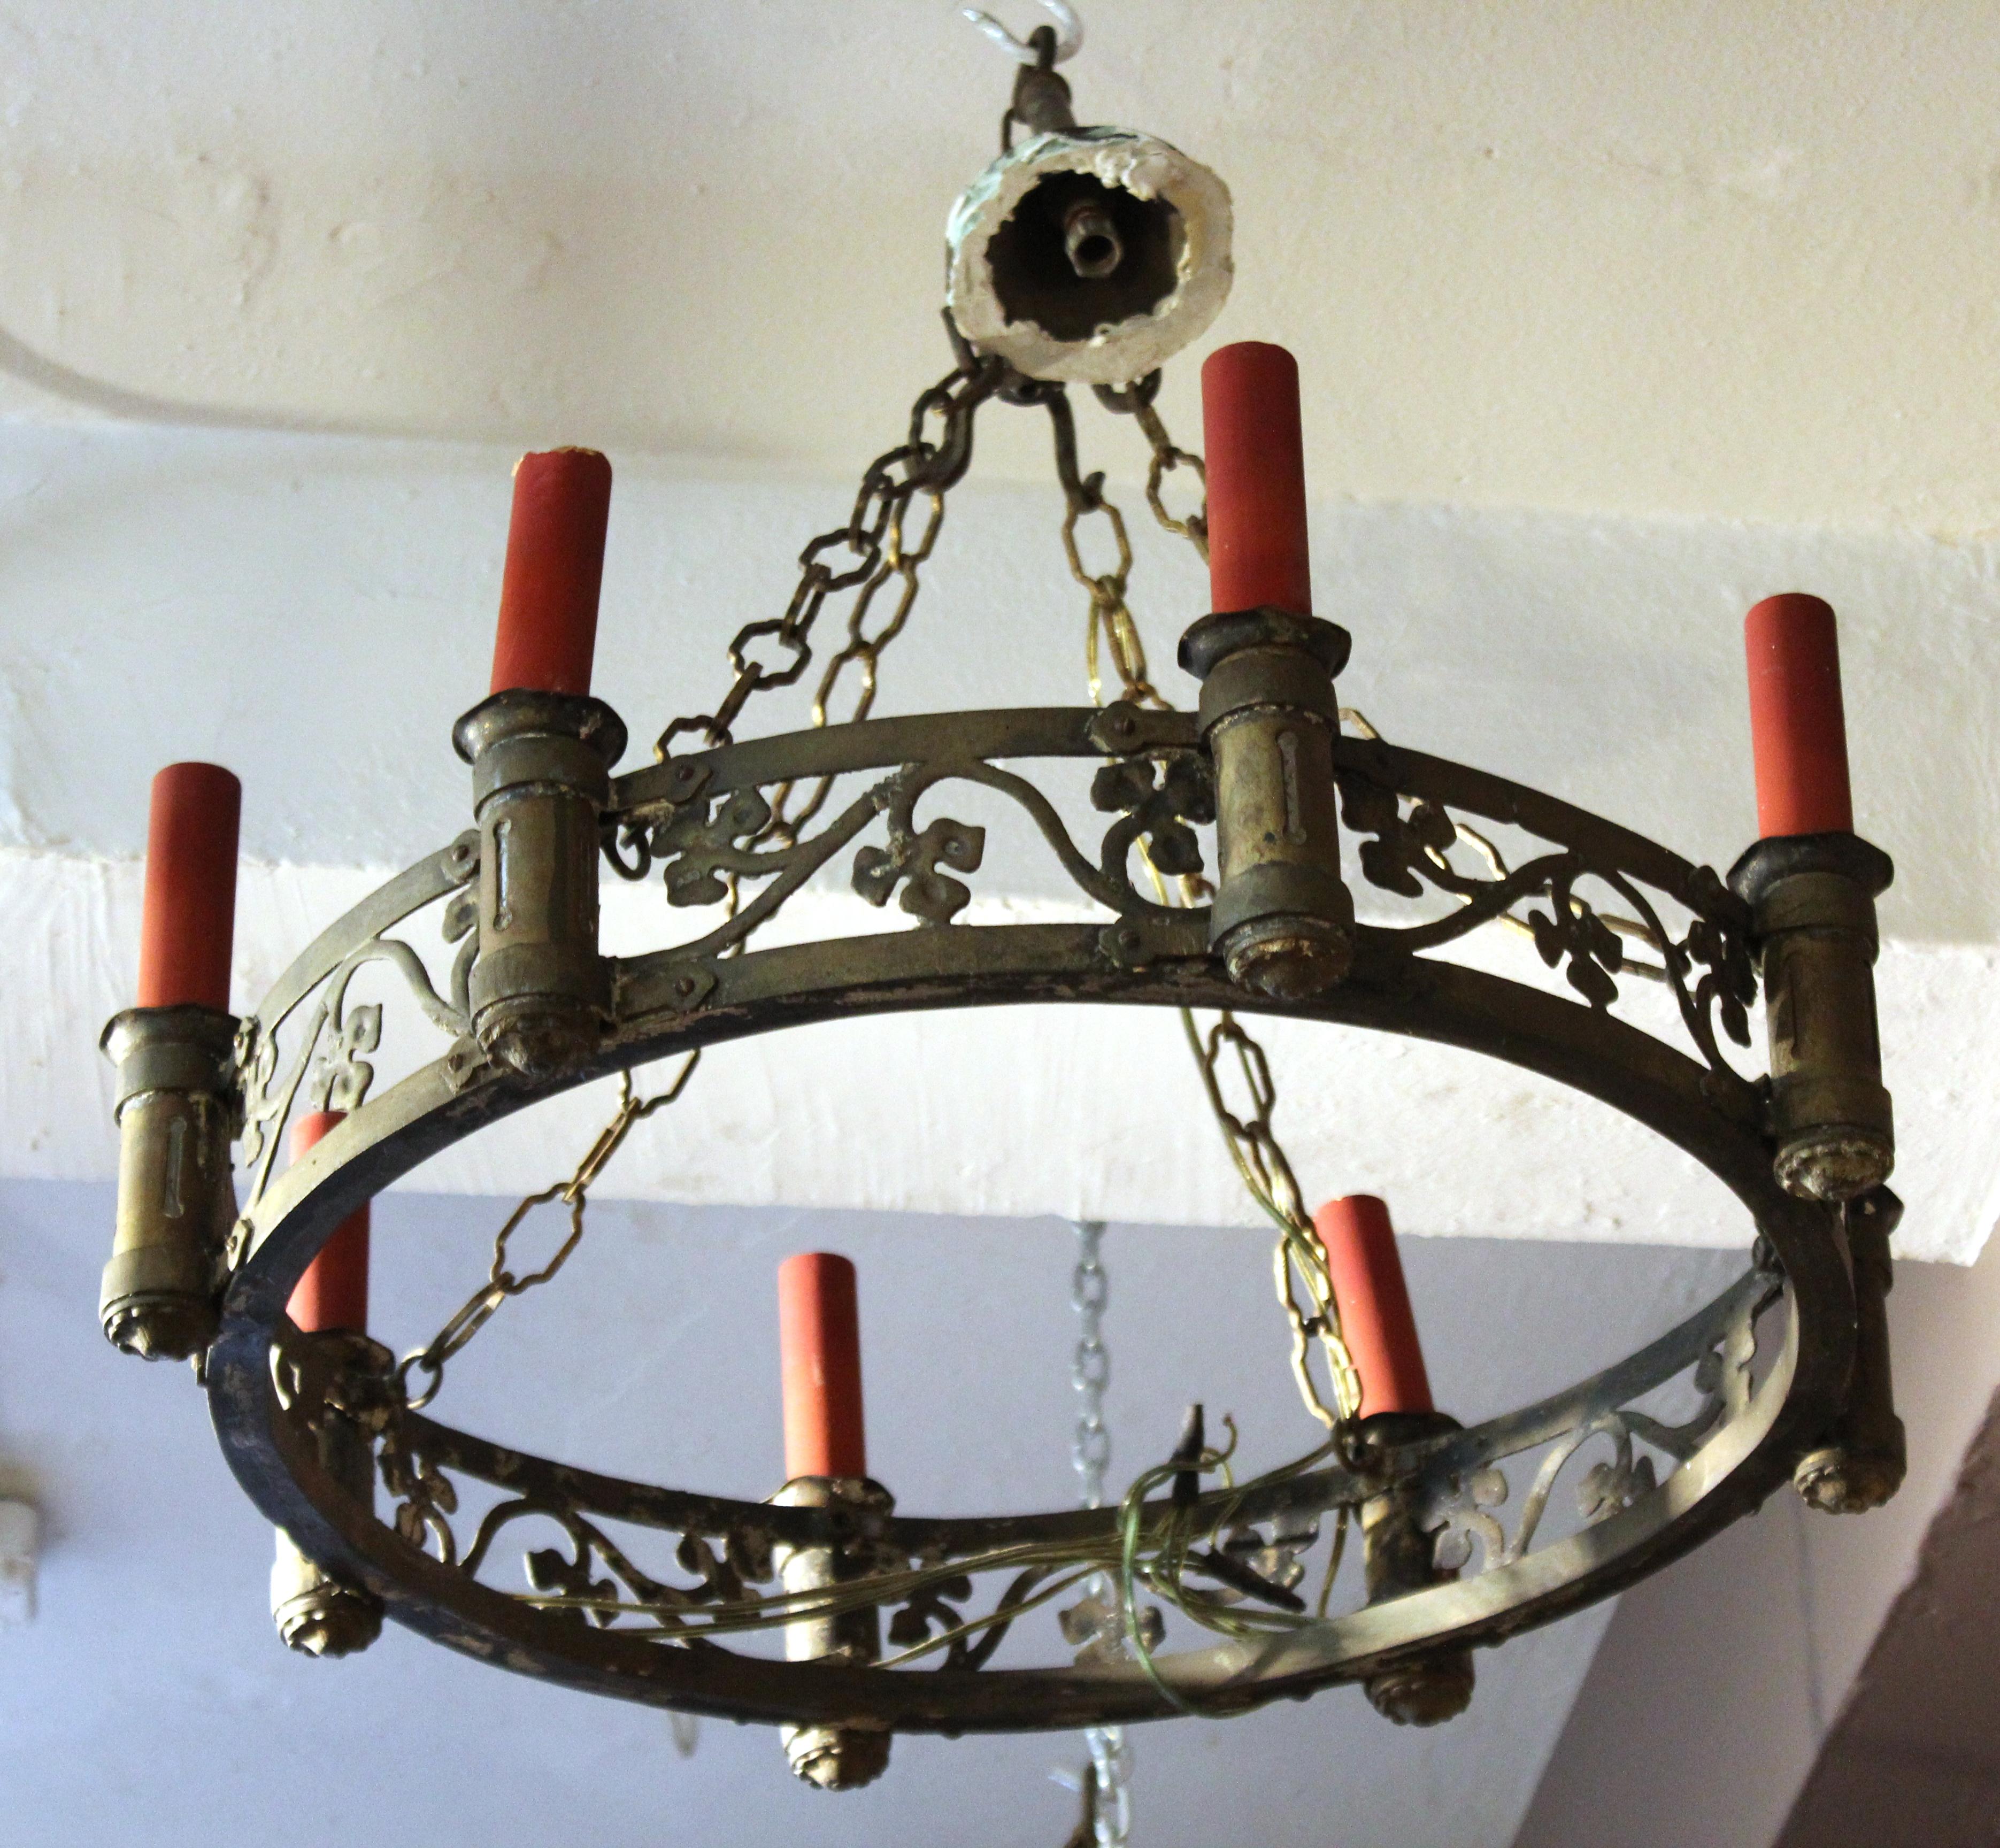 Continental Spanish Renaissance Revival or Neo-Gothic style pair of wrought gilt brass eight-light chandeliers with foliage designs and red cardboard faux candle sleeves. The pair has wrought link chains with four-hook ceiling caps. In good antique